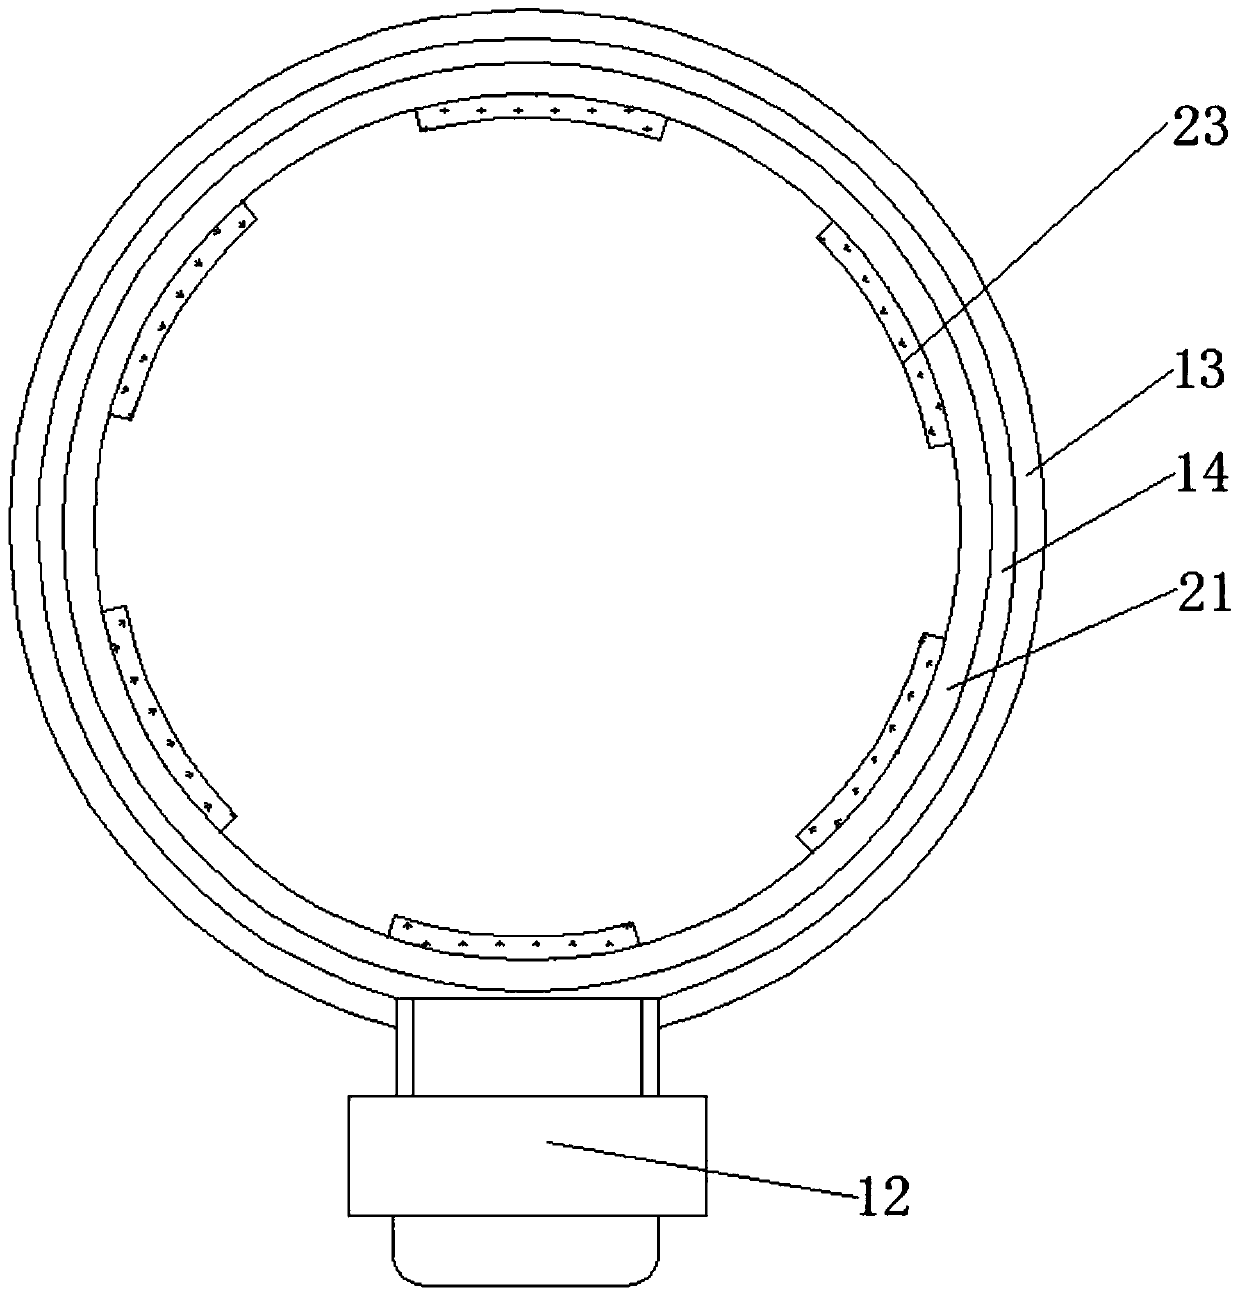 Air catcher of bedside hemofiltration device